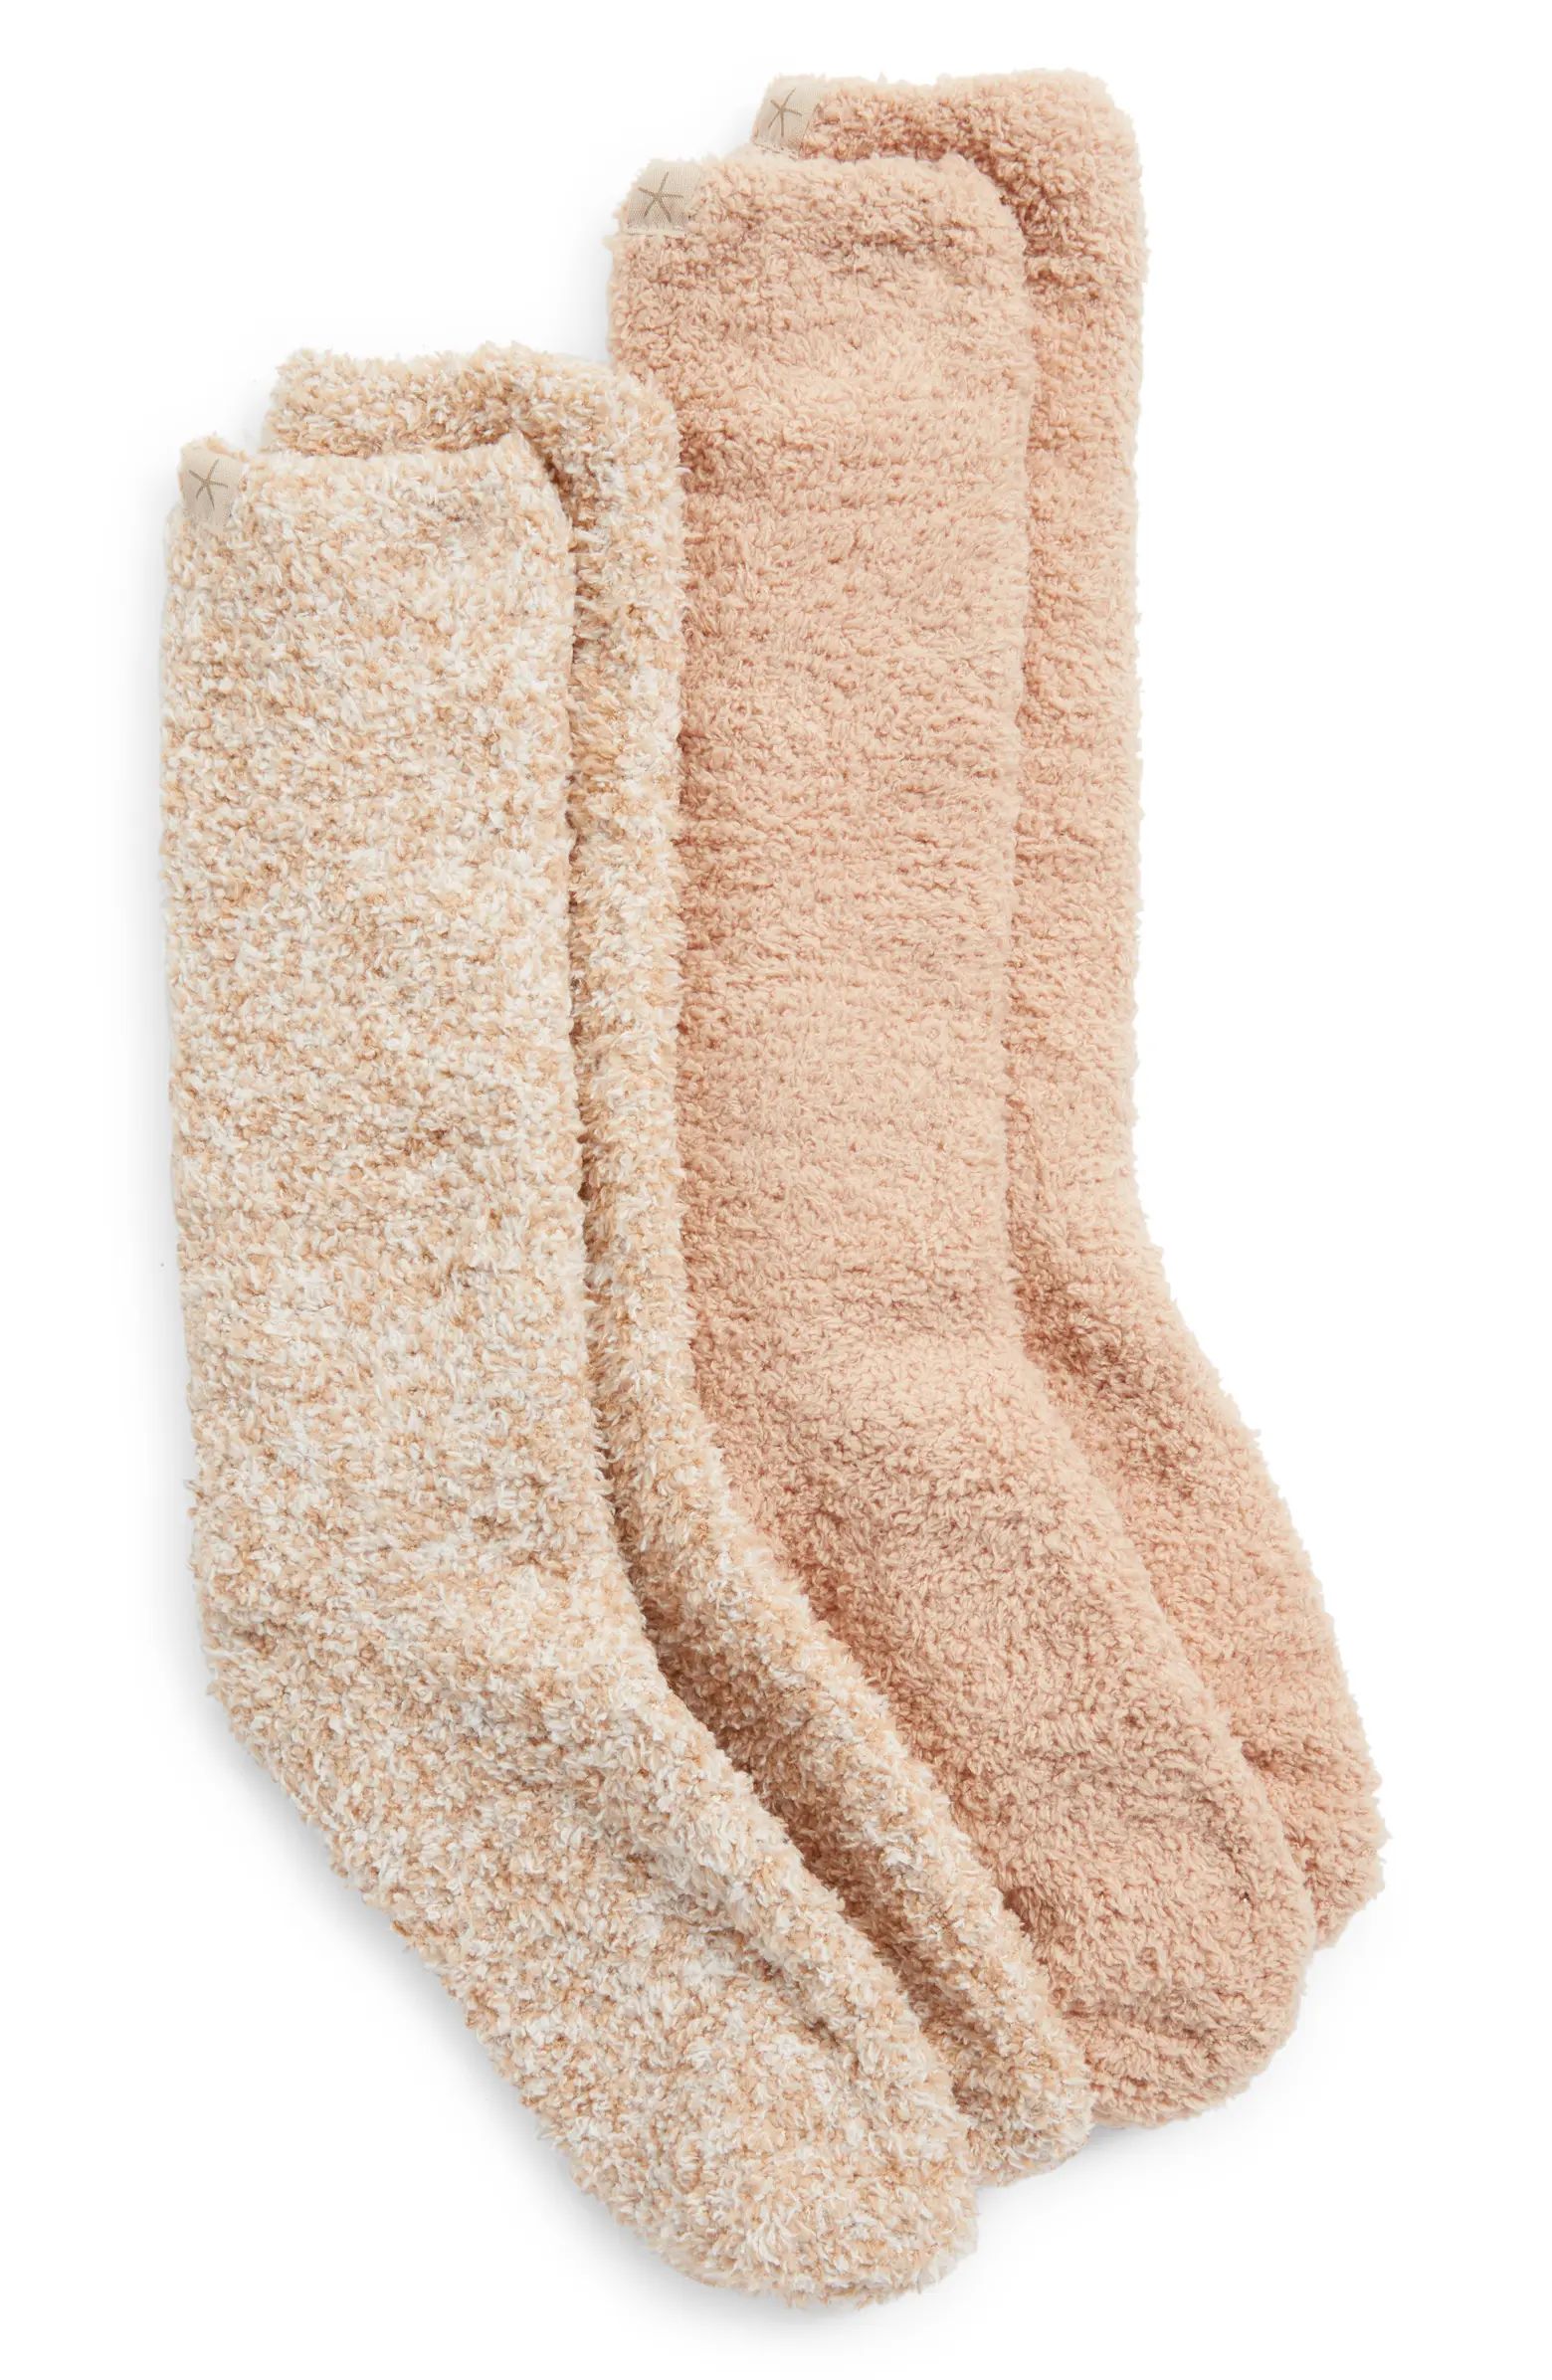 Snuggle up with ultra-cozy socks in a crew length to keep you nice and toasty. | Nordstrom